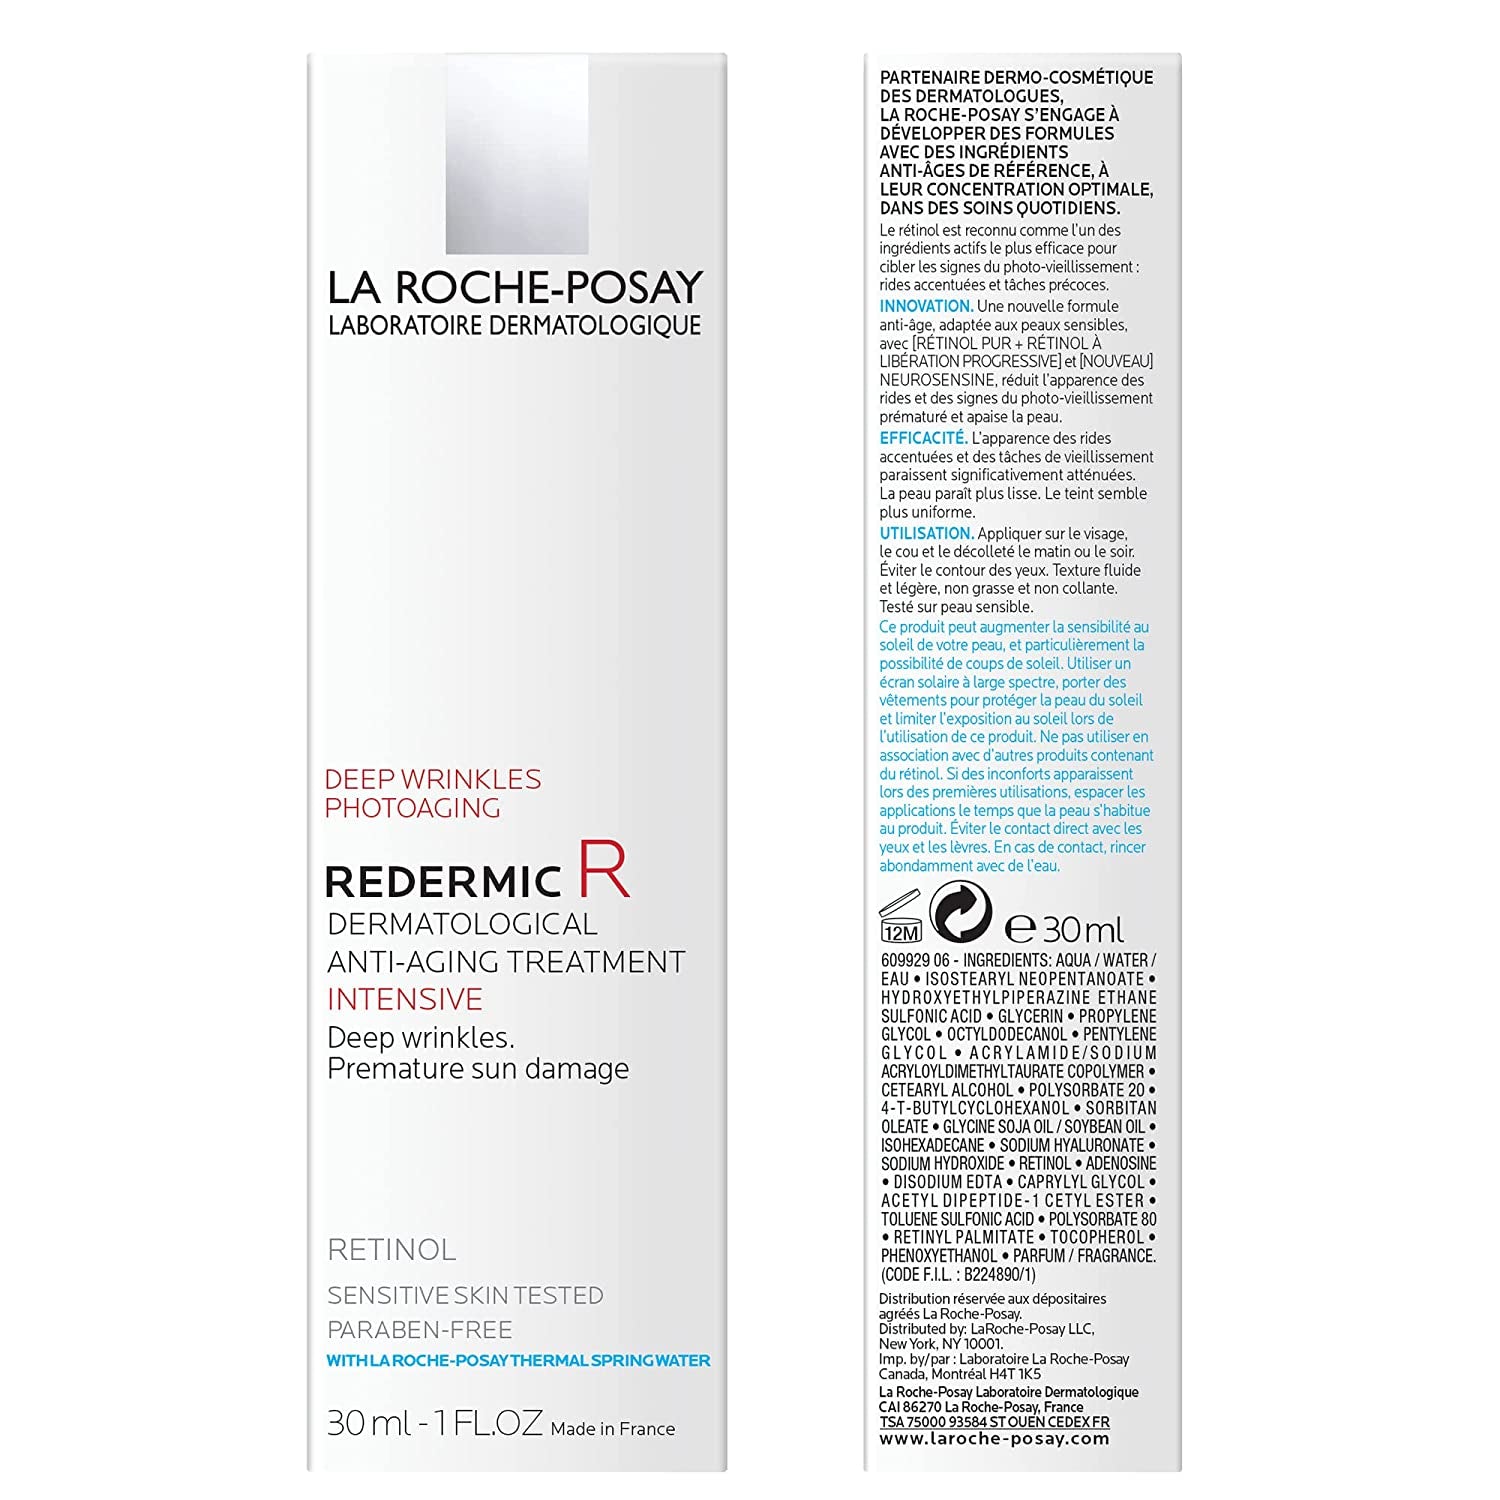 La Roche-Posay Redermic R anti Aging Retinol Cream, Reduces Wrinkles, Fine Lines, and Age Spots with Pure Retinol Face Cream, 1 Fl Oz - Free & Fast Delivery